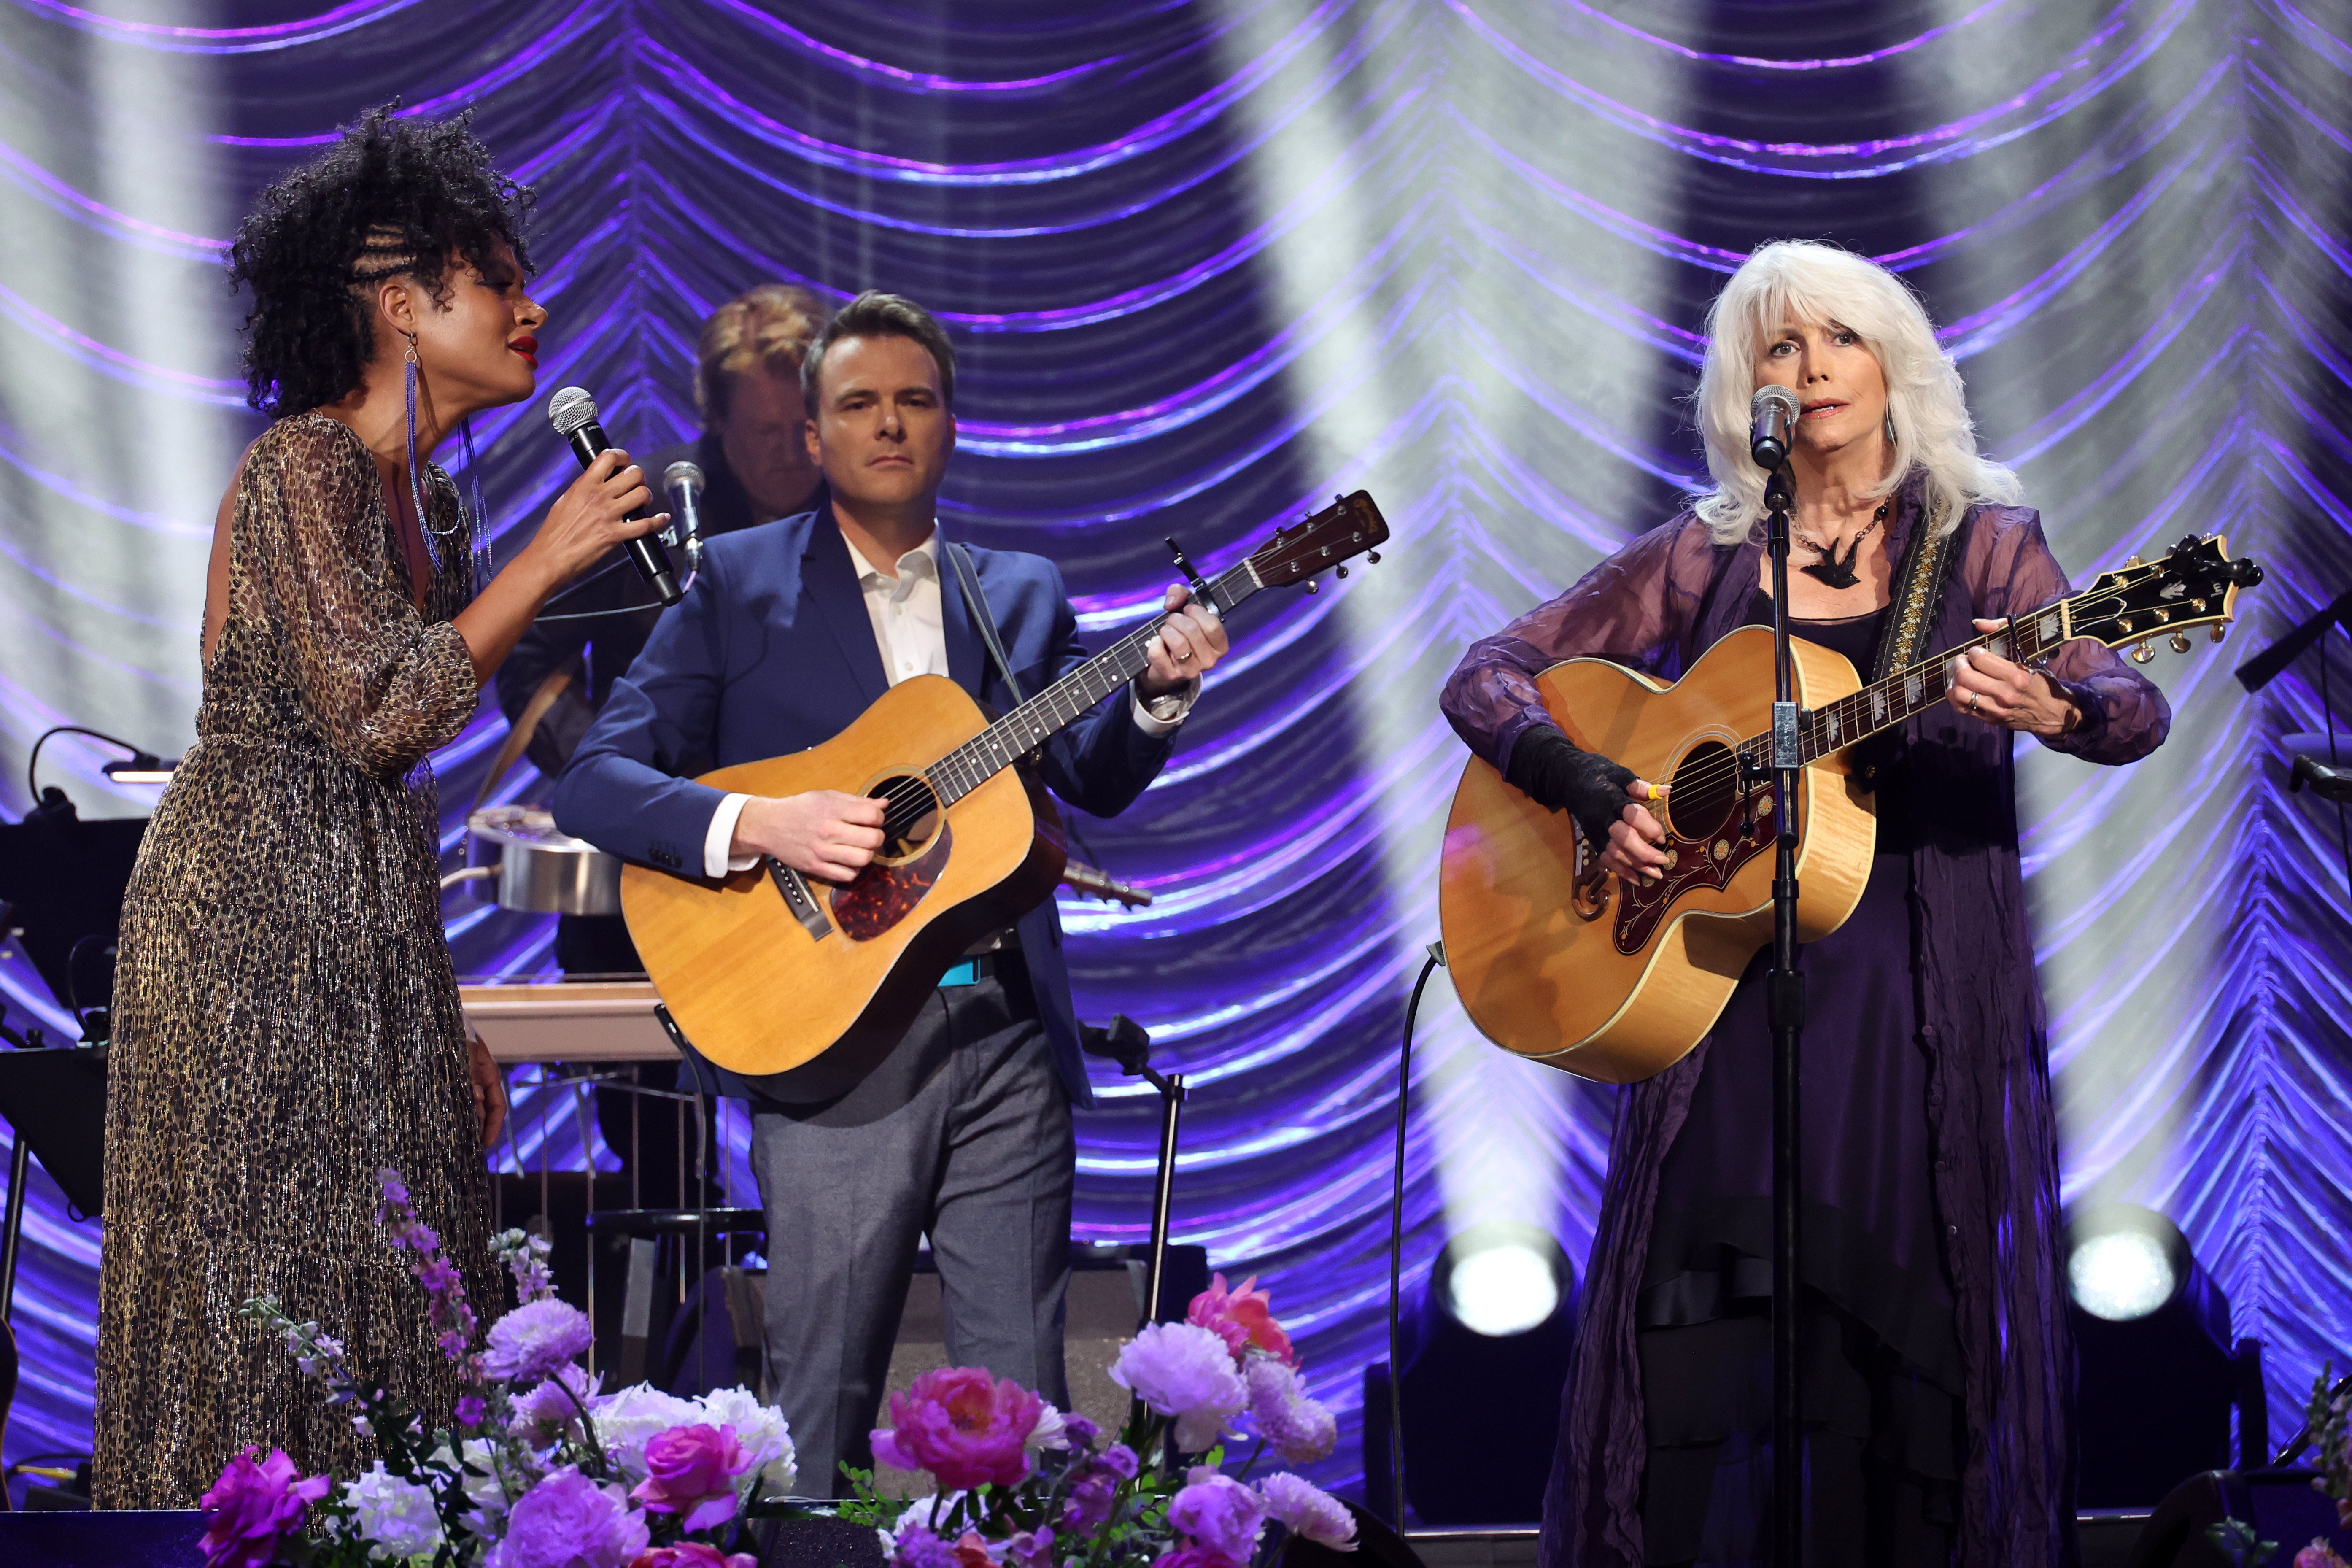 Allison Russell and Emmylou Harris perform onstage during the "Naomi Judd: A River Of Time Celebration" on May 15, 2022, in Nashville, Tennessee. | Source: Jason Kempin/Getty Images